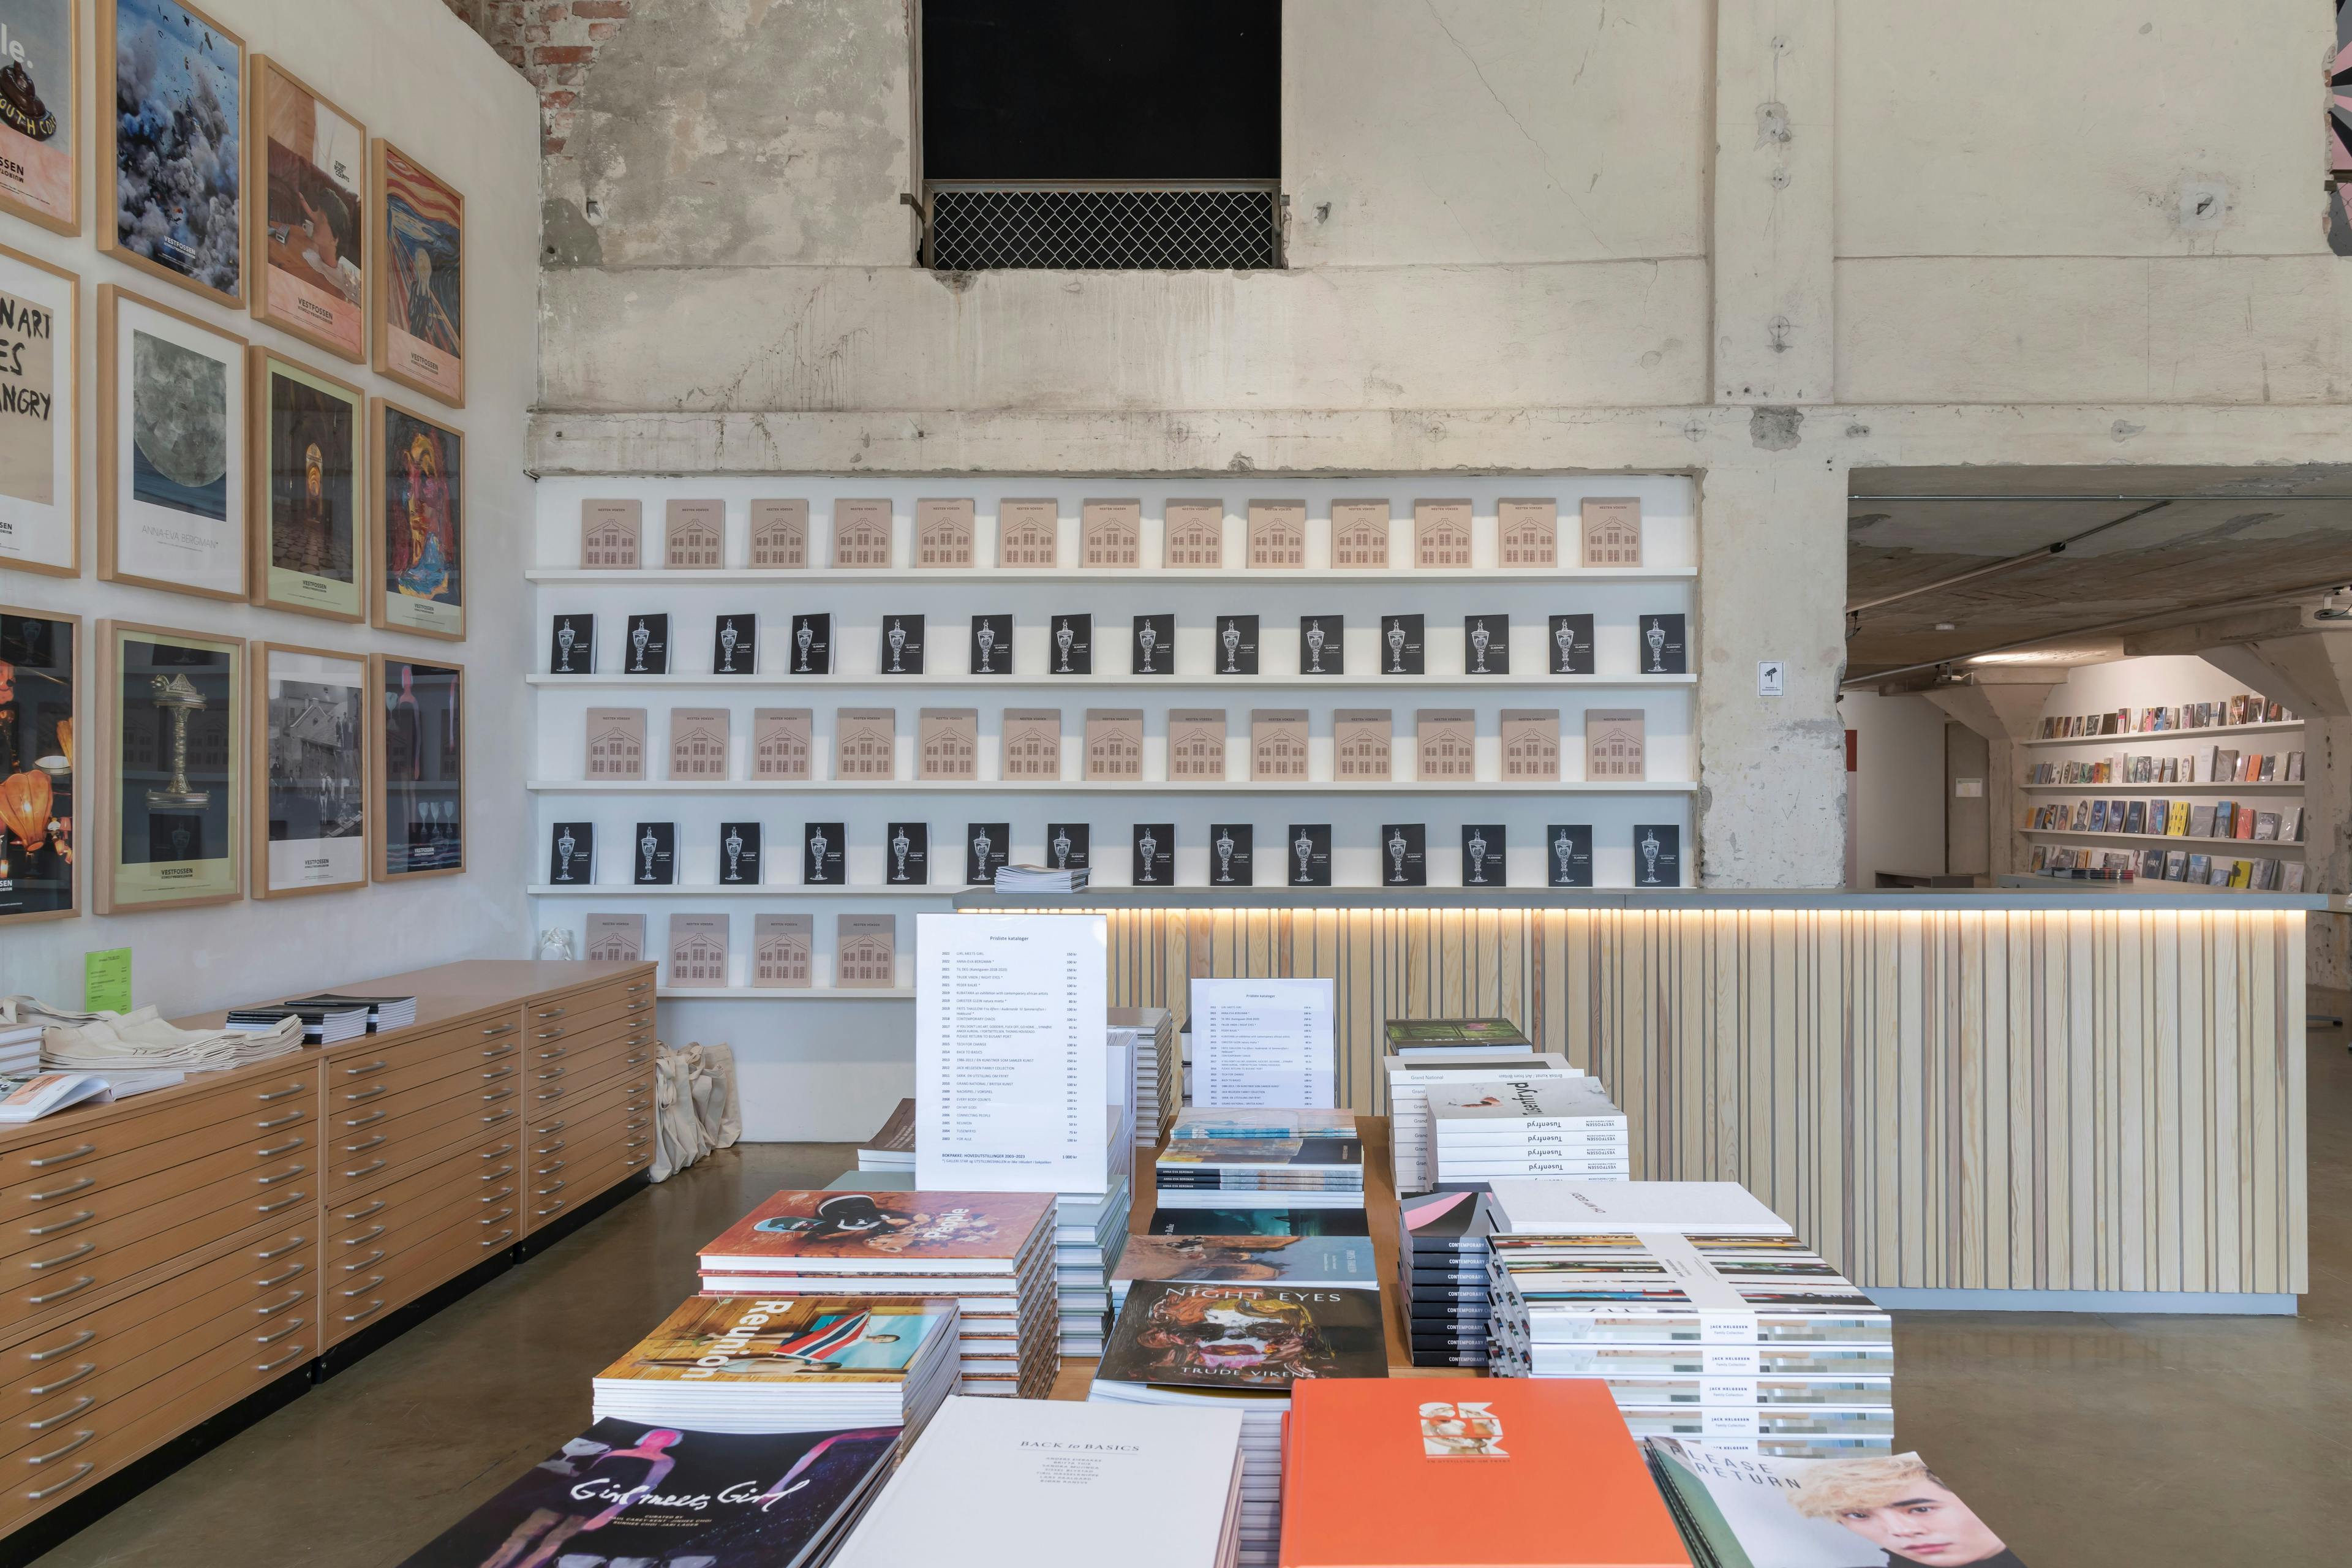 The Bookstore offers catalogues from present and previous exhibitions